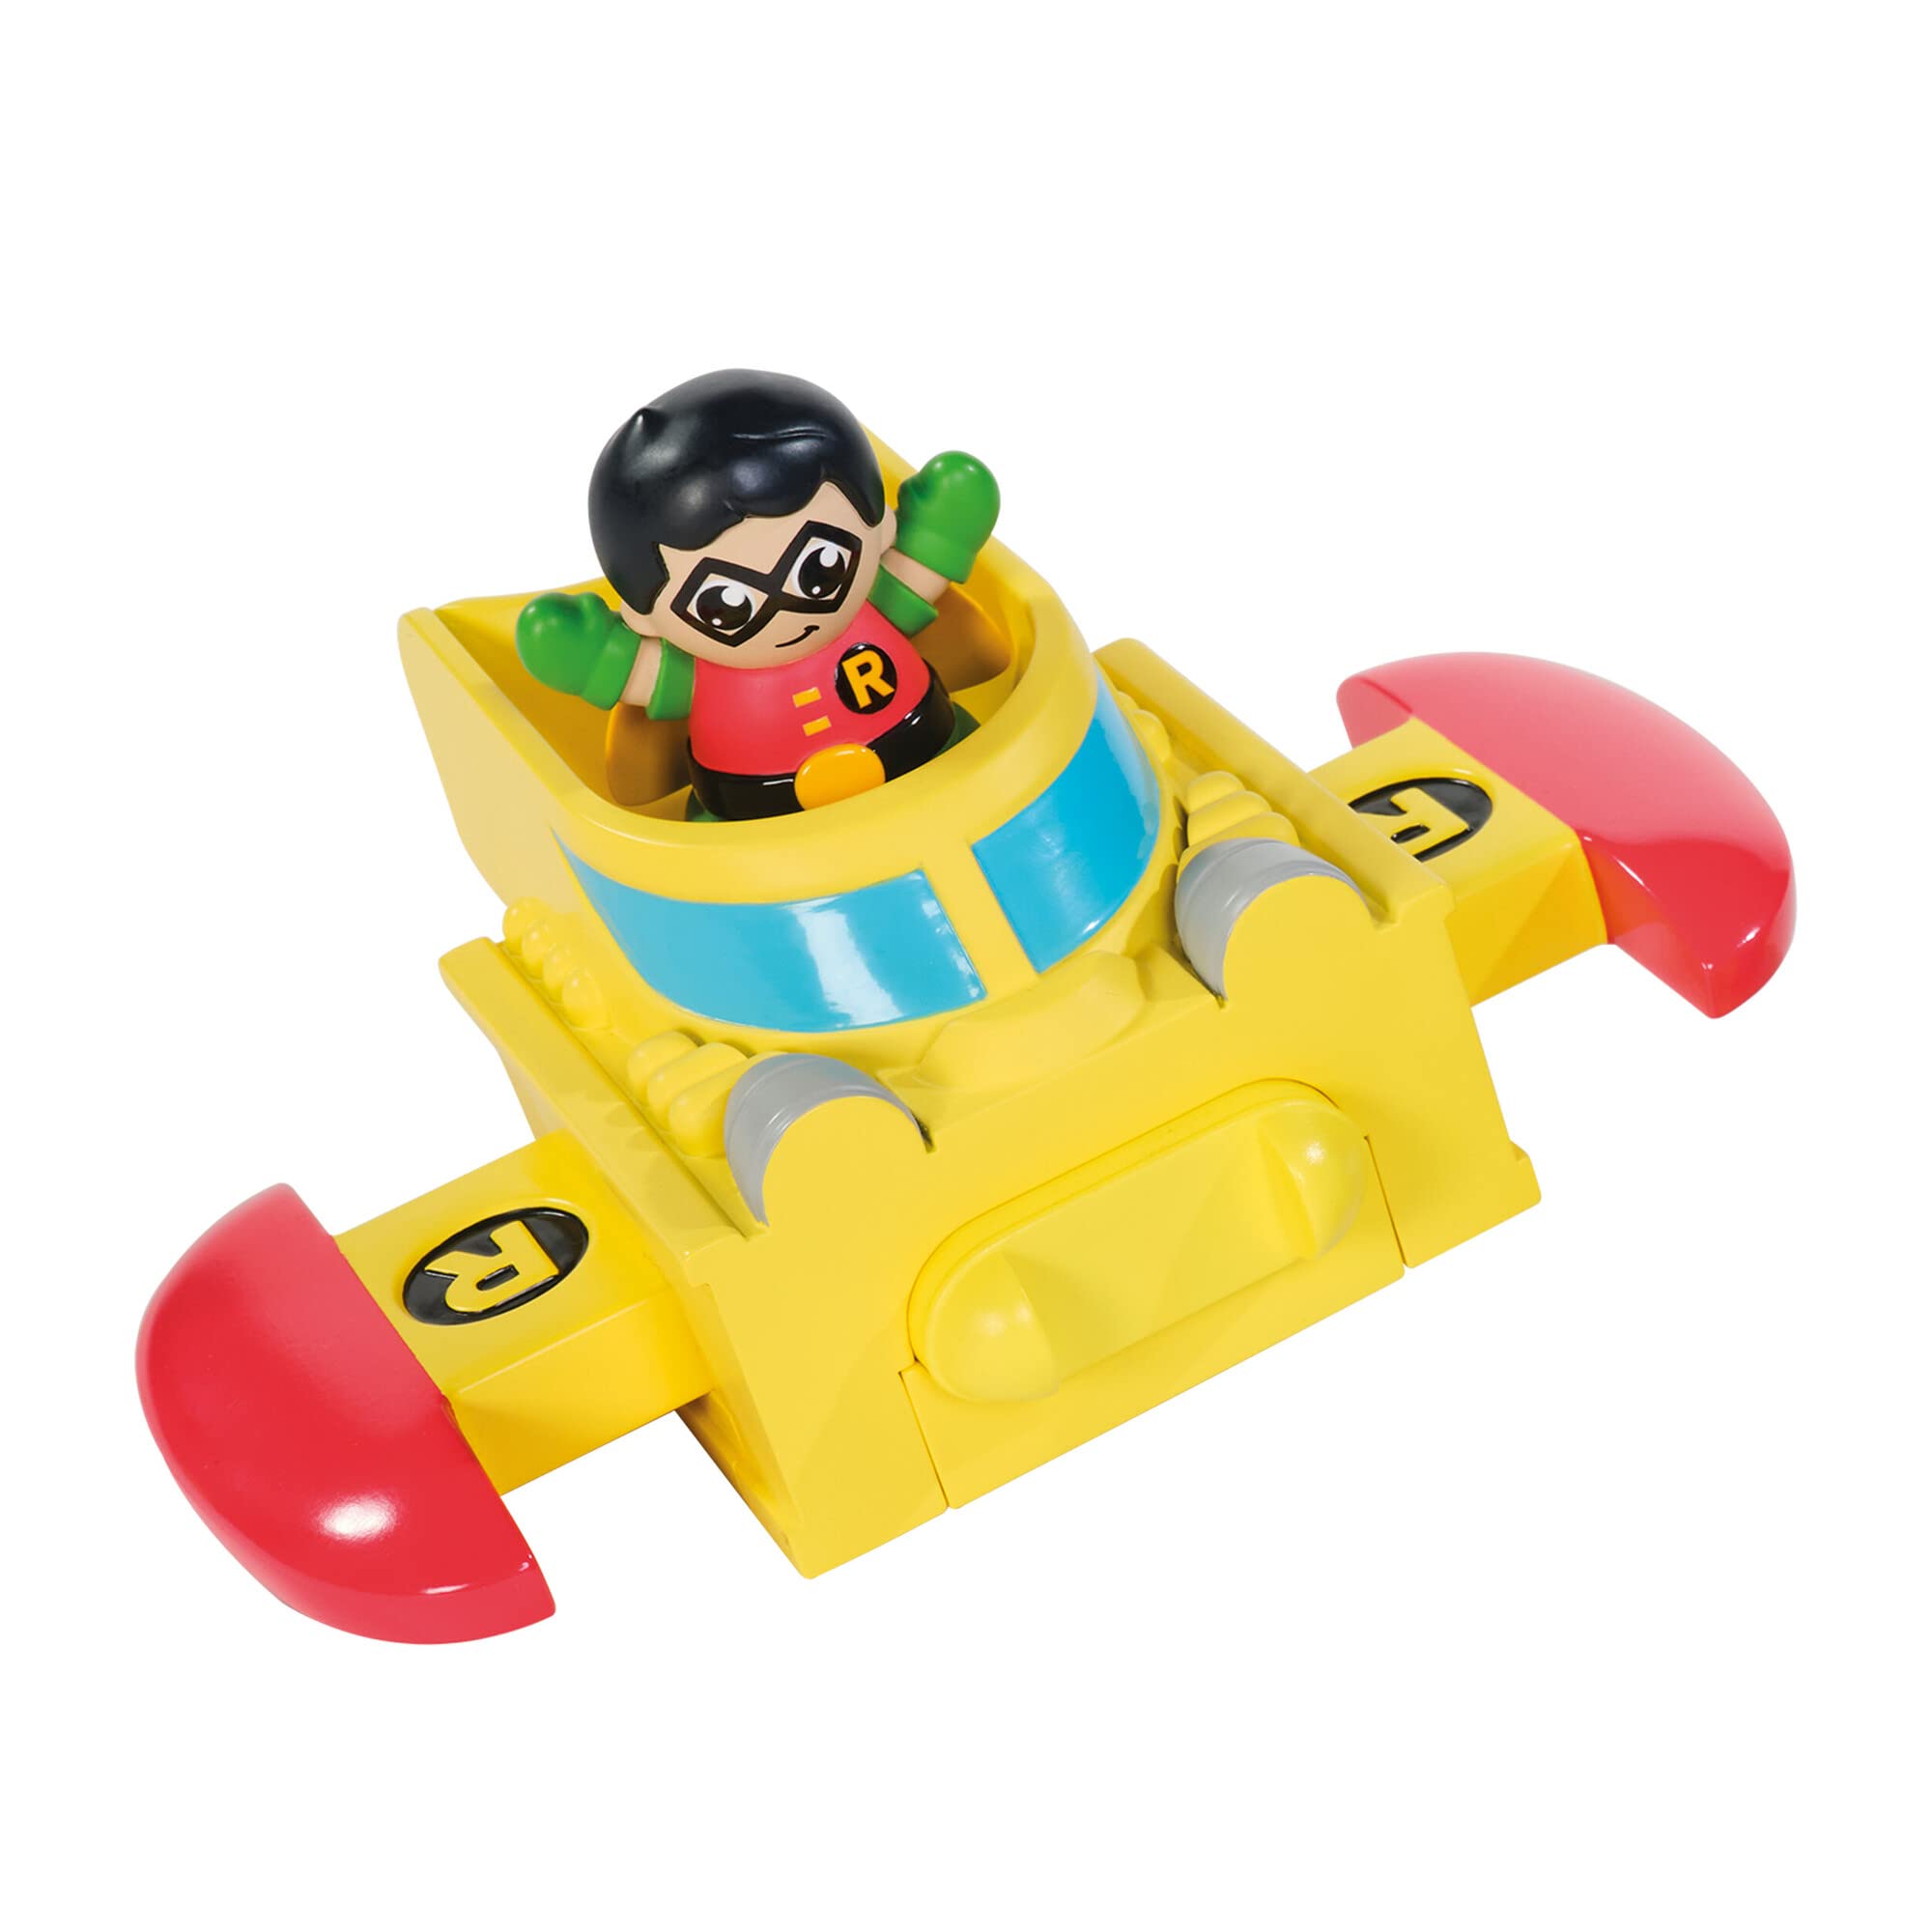 Toomies DC Comics Batman E73262 3 in 1 Vehicle Transforms into Mini Batmobile and Jet, Engine Popping Effect, Flywheel Drive Push Along, from 12 Months